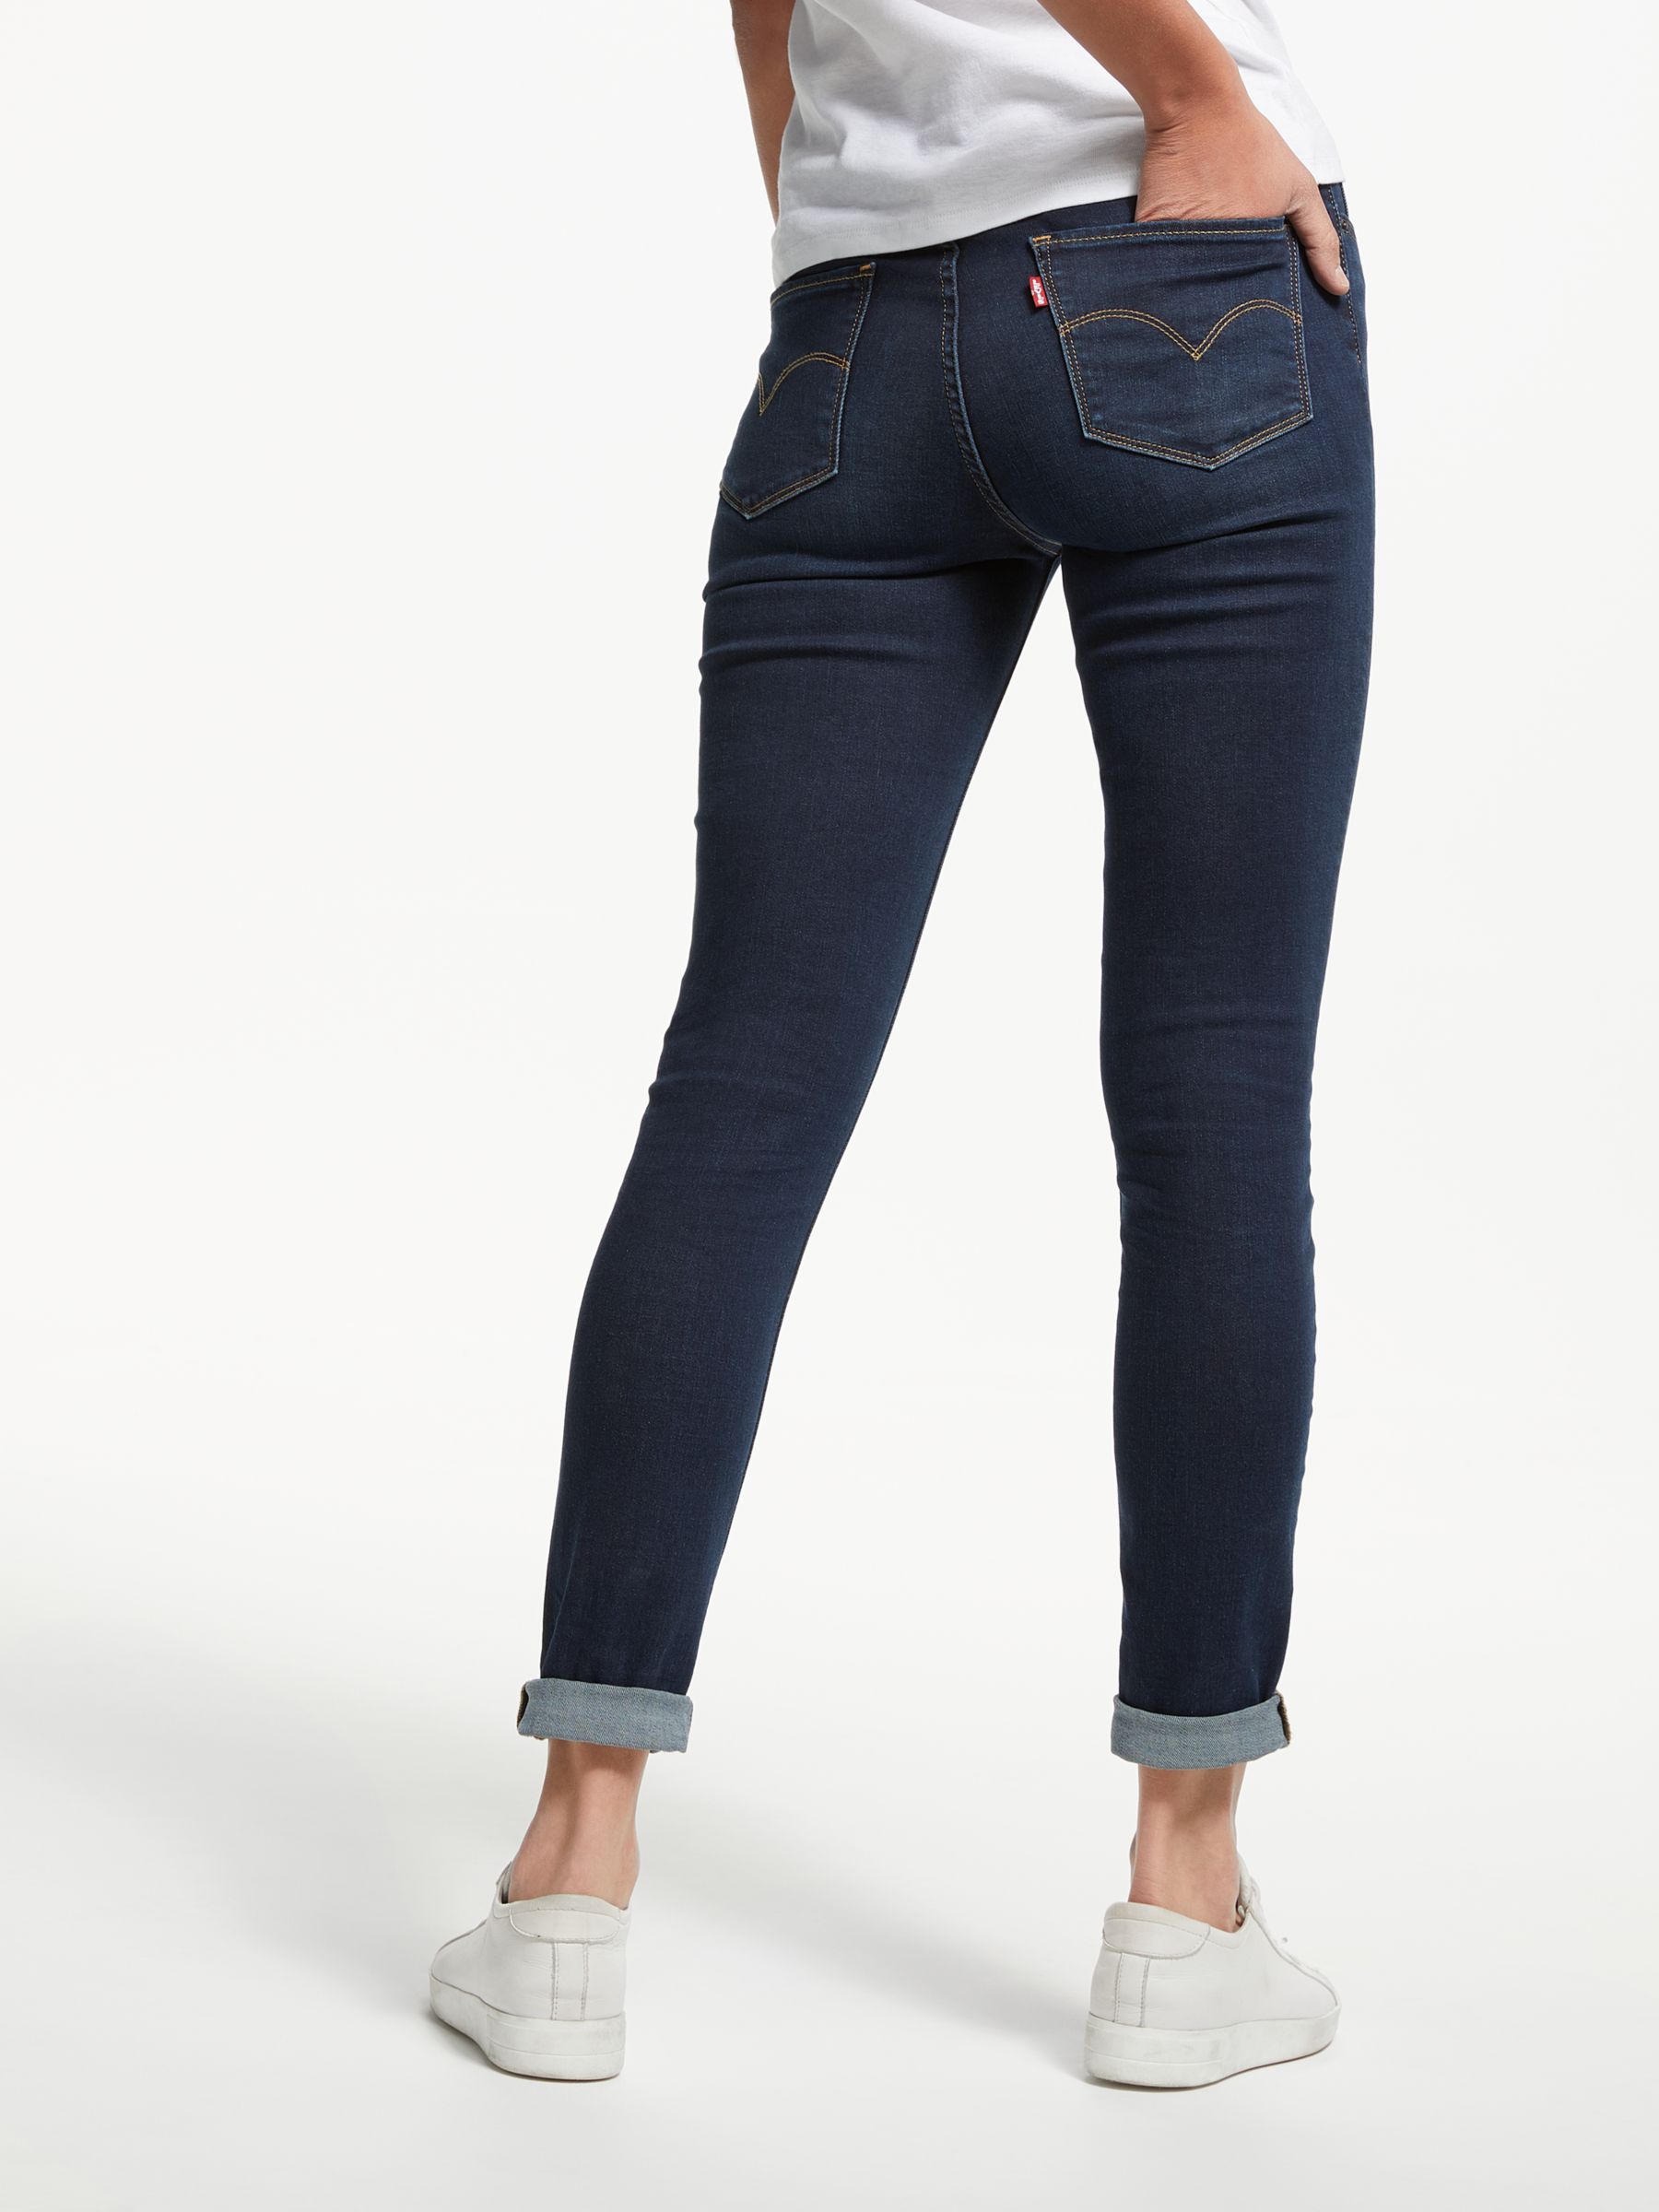 Levi's 721 High Rise Skinny Jeans at 